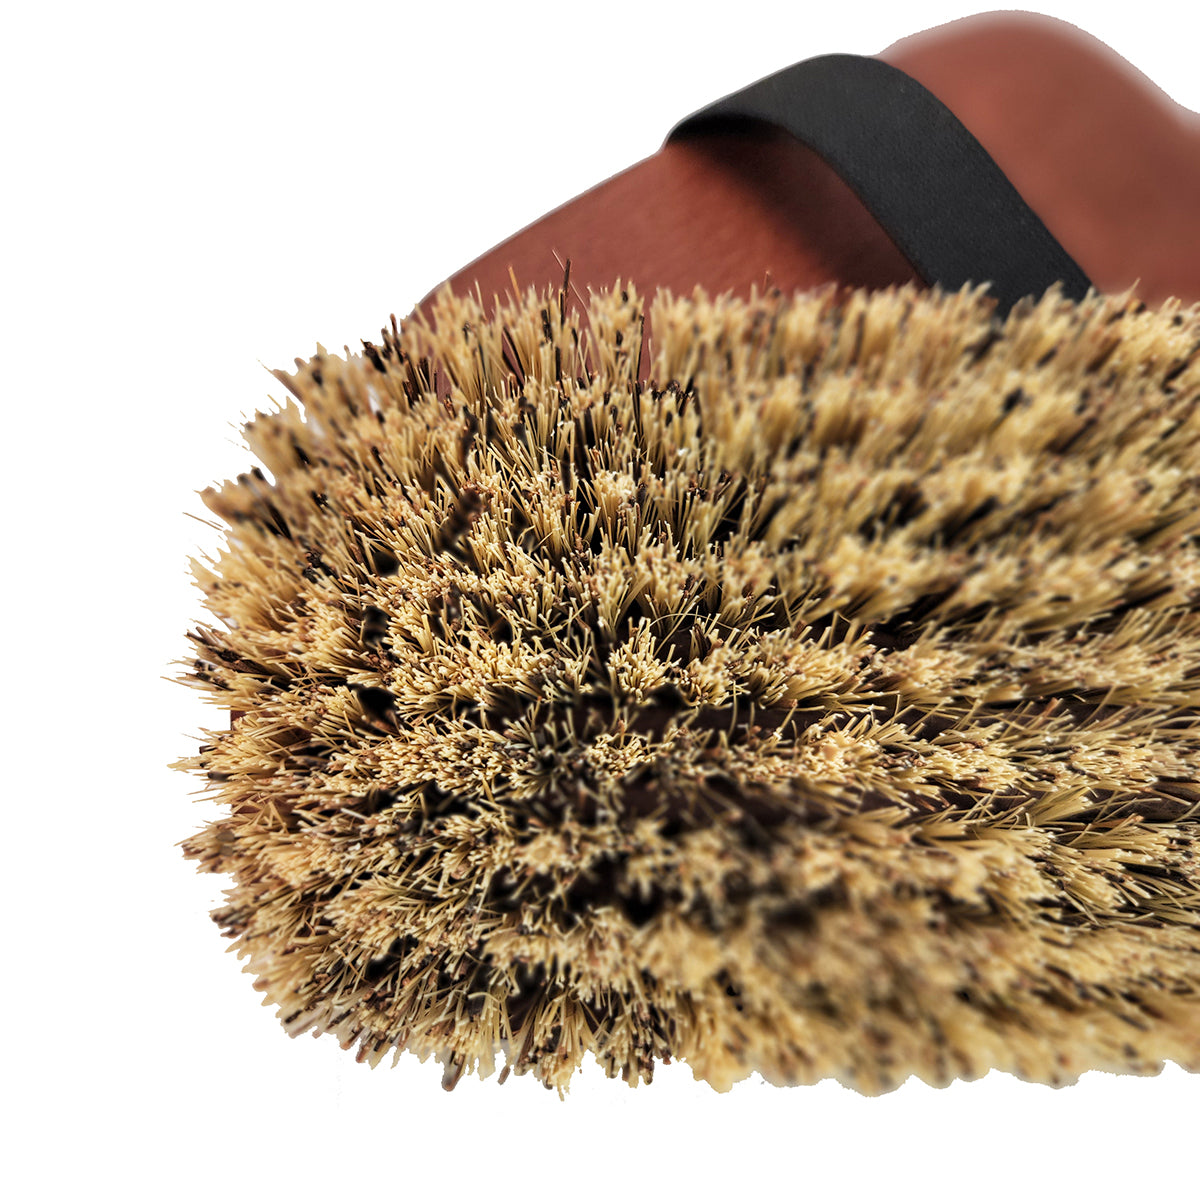 firm bristles on a natural horse grooming brush